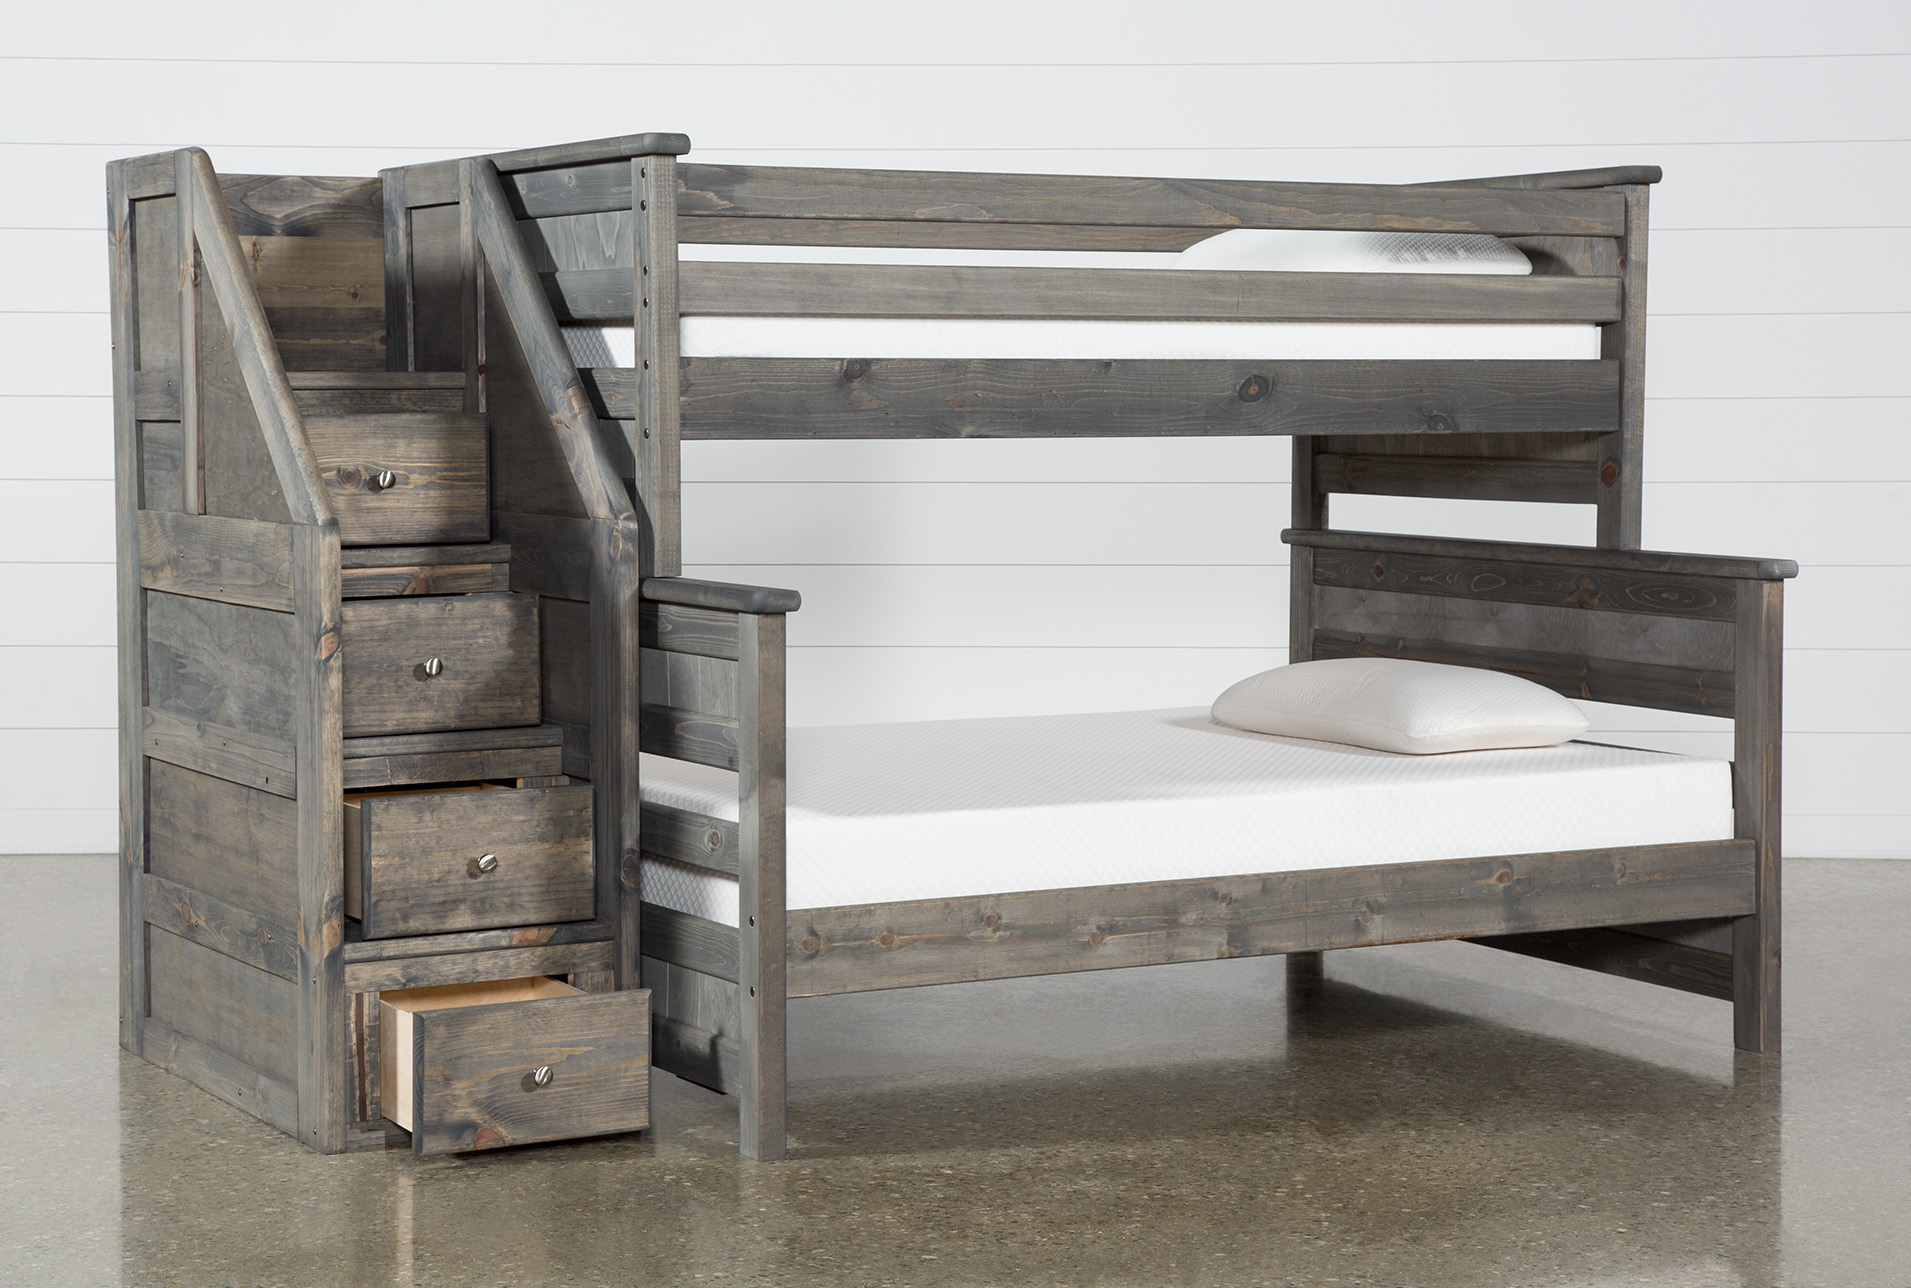 wooden bunk beds with storage